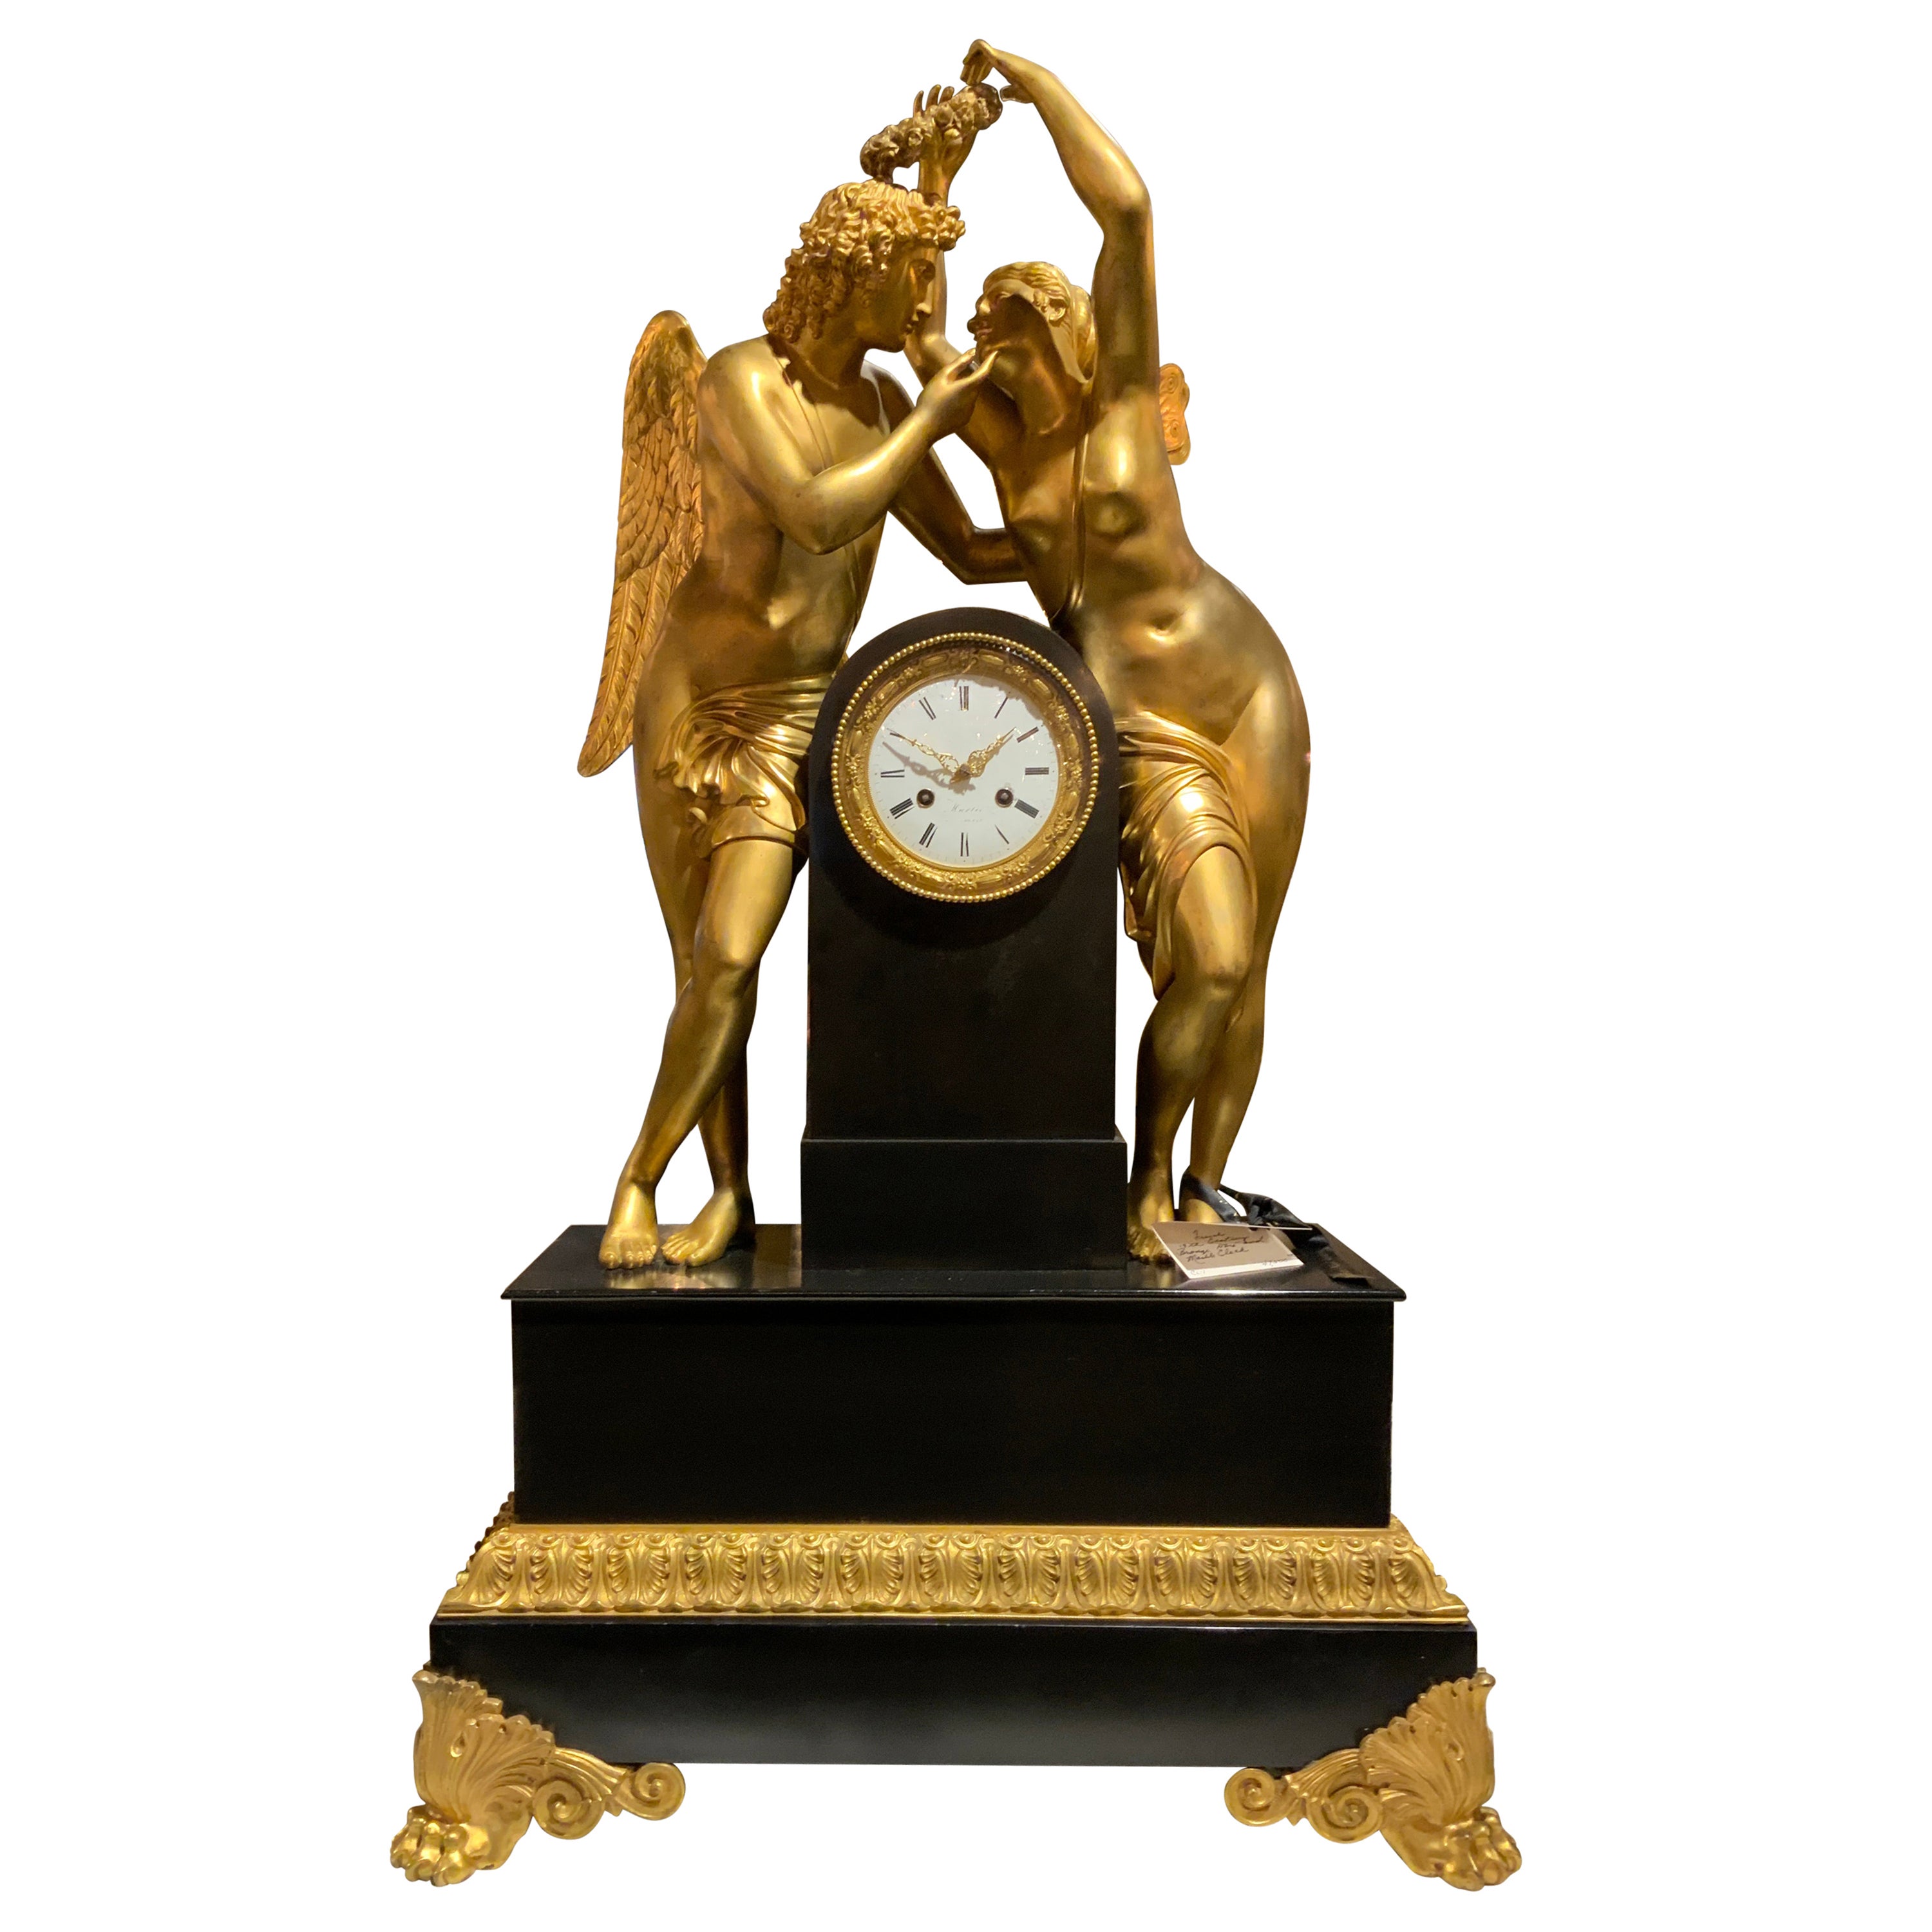 Monumental Marble and Bronze Dore’ Clock Adorned with Psyche and Amor Figures